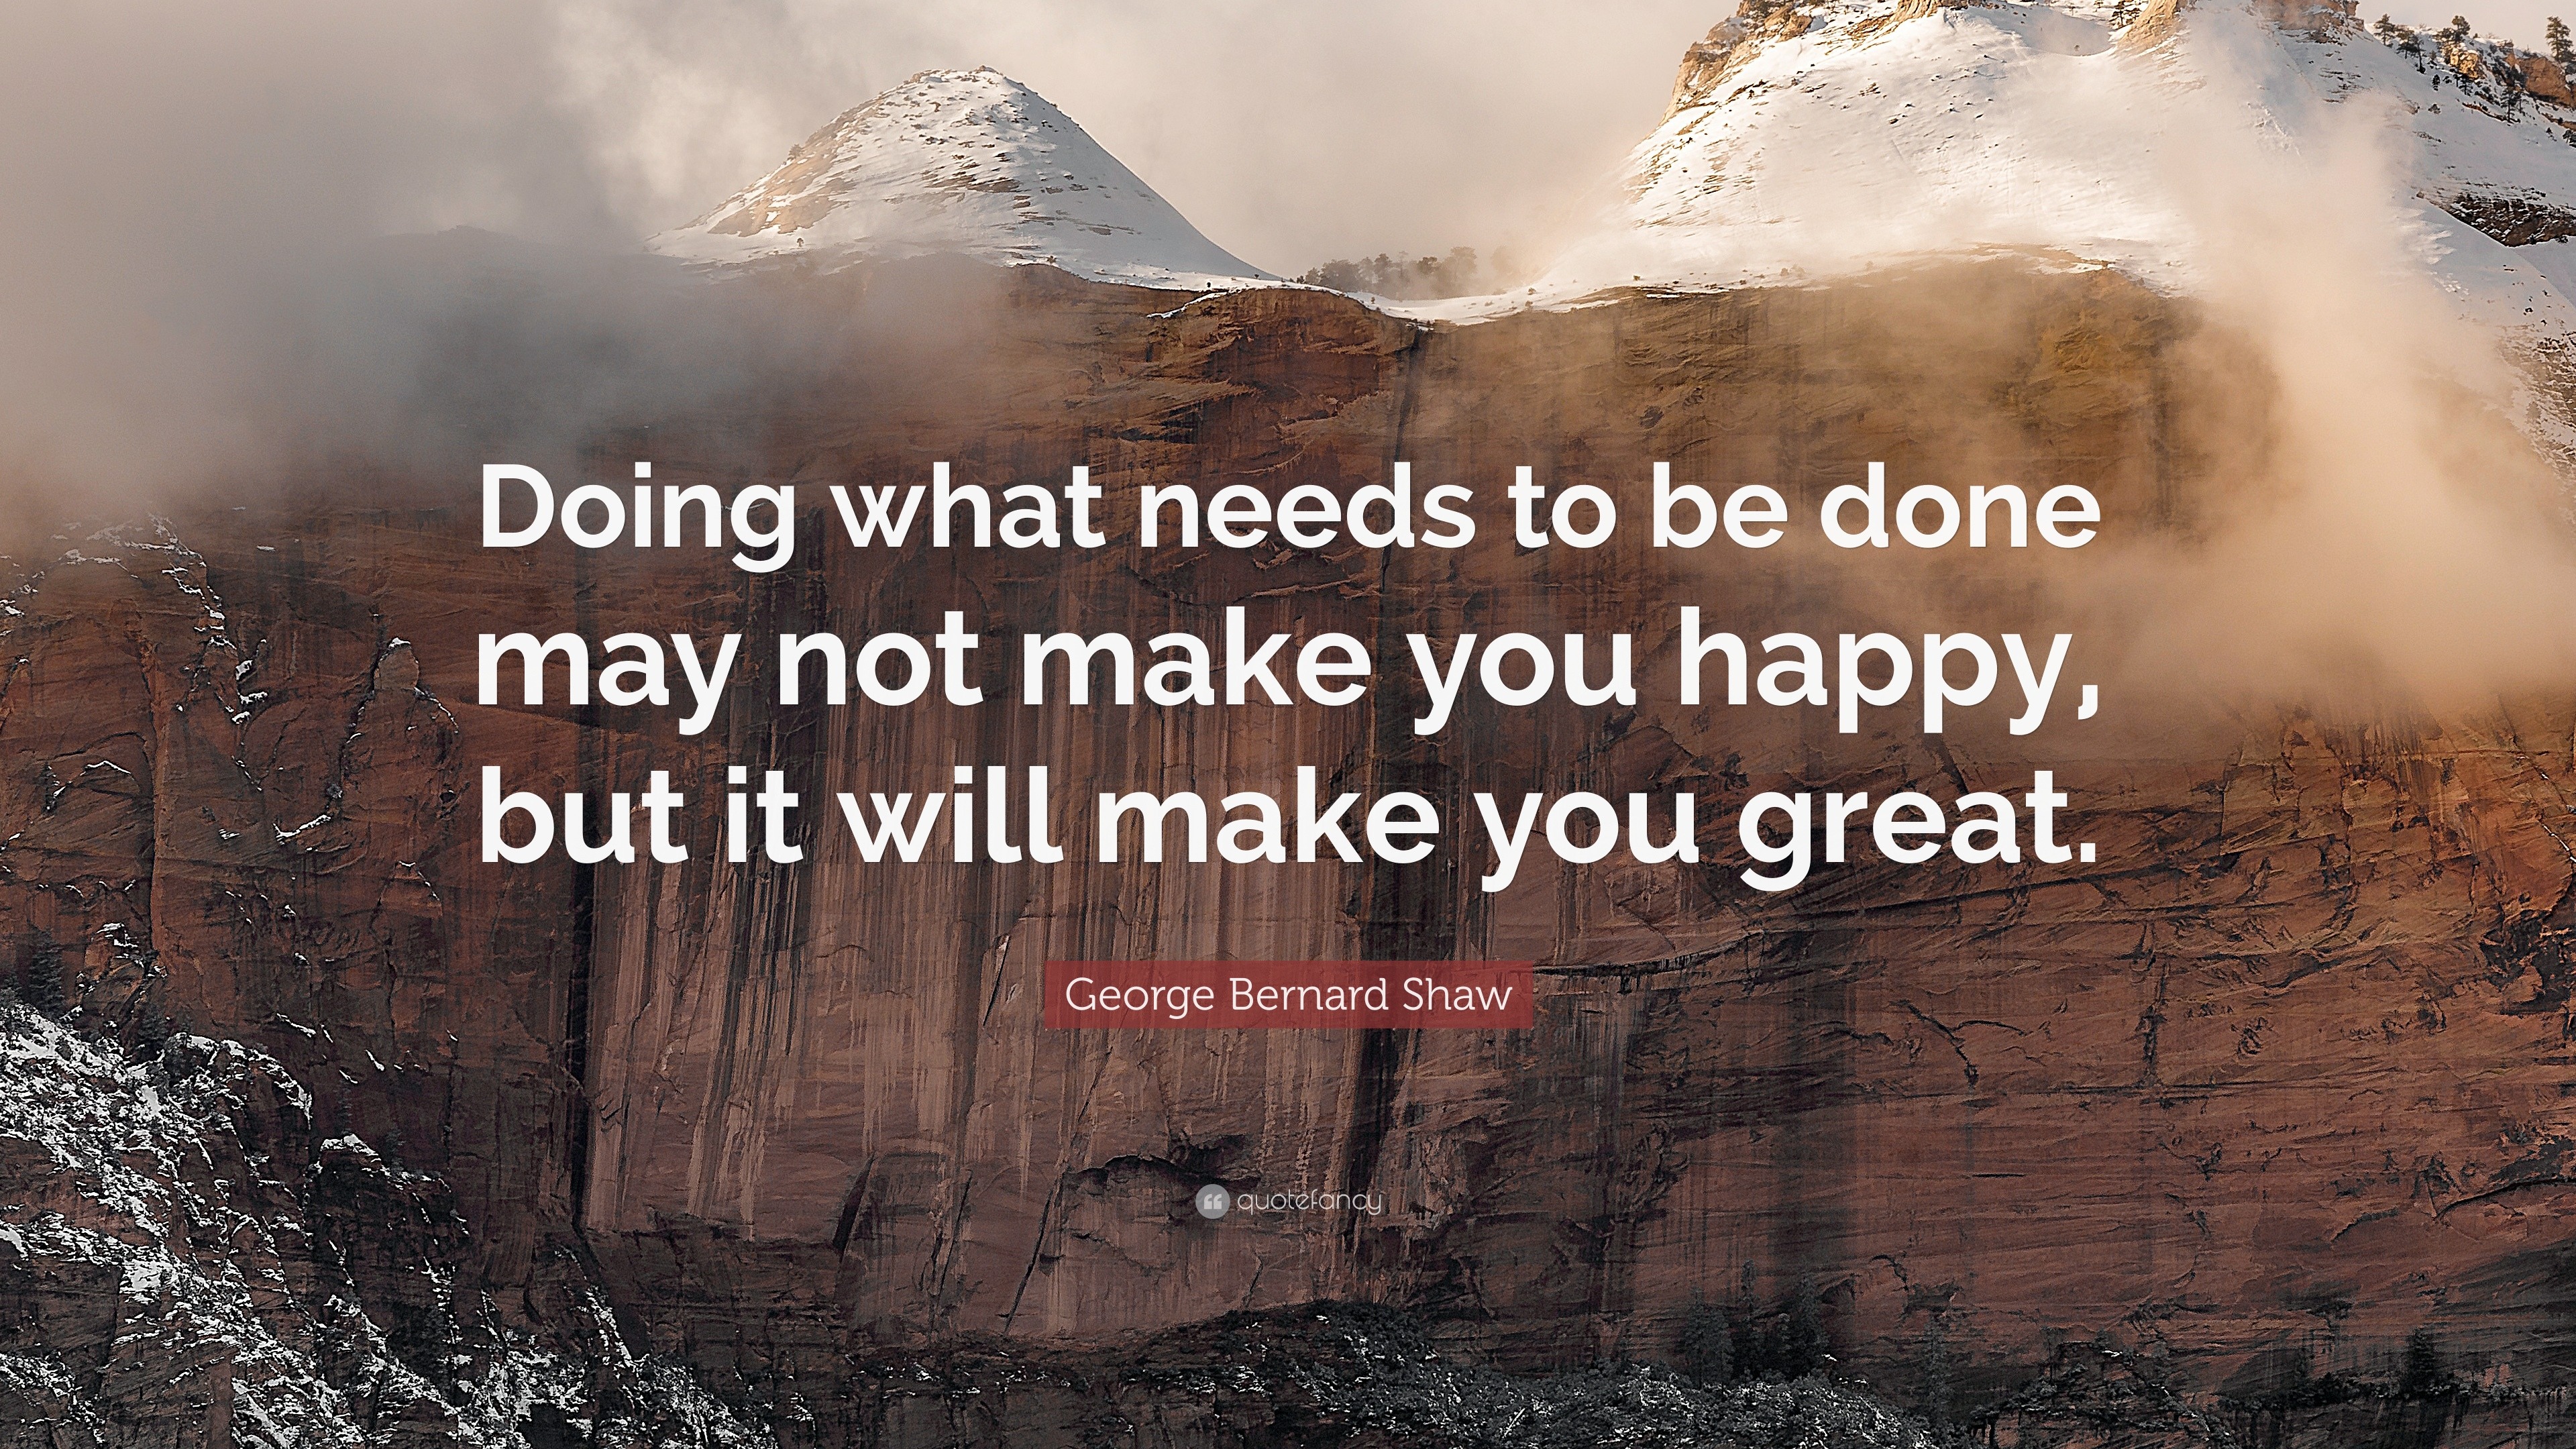 George Bernard Shaw Quote: “Doing what needs to be done may not make